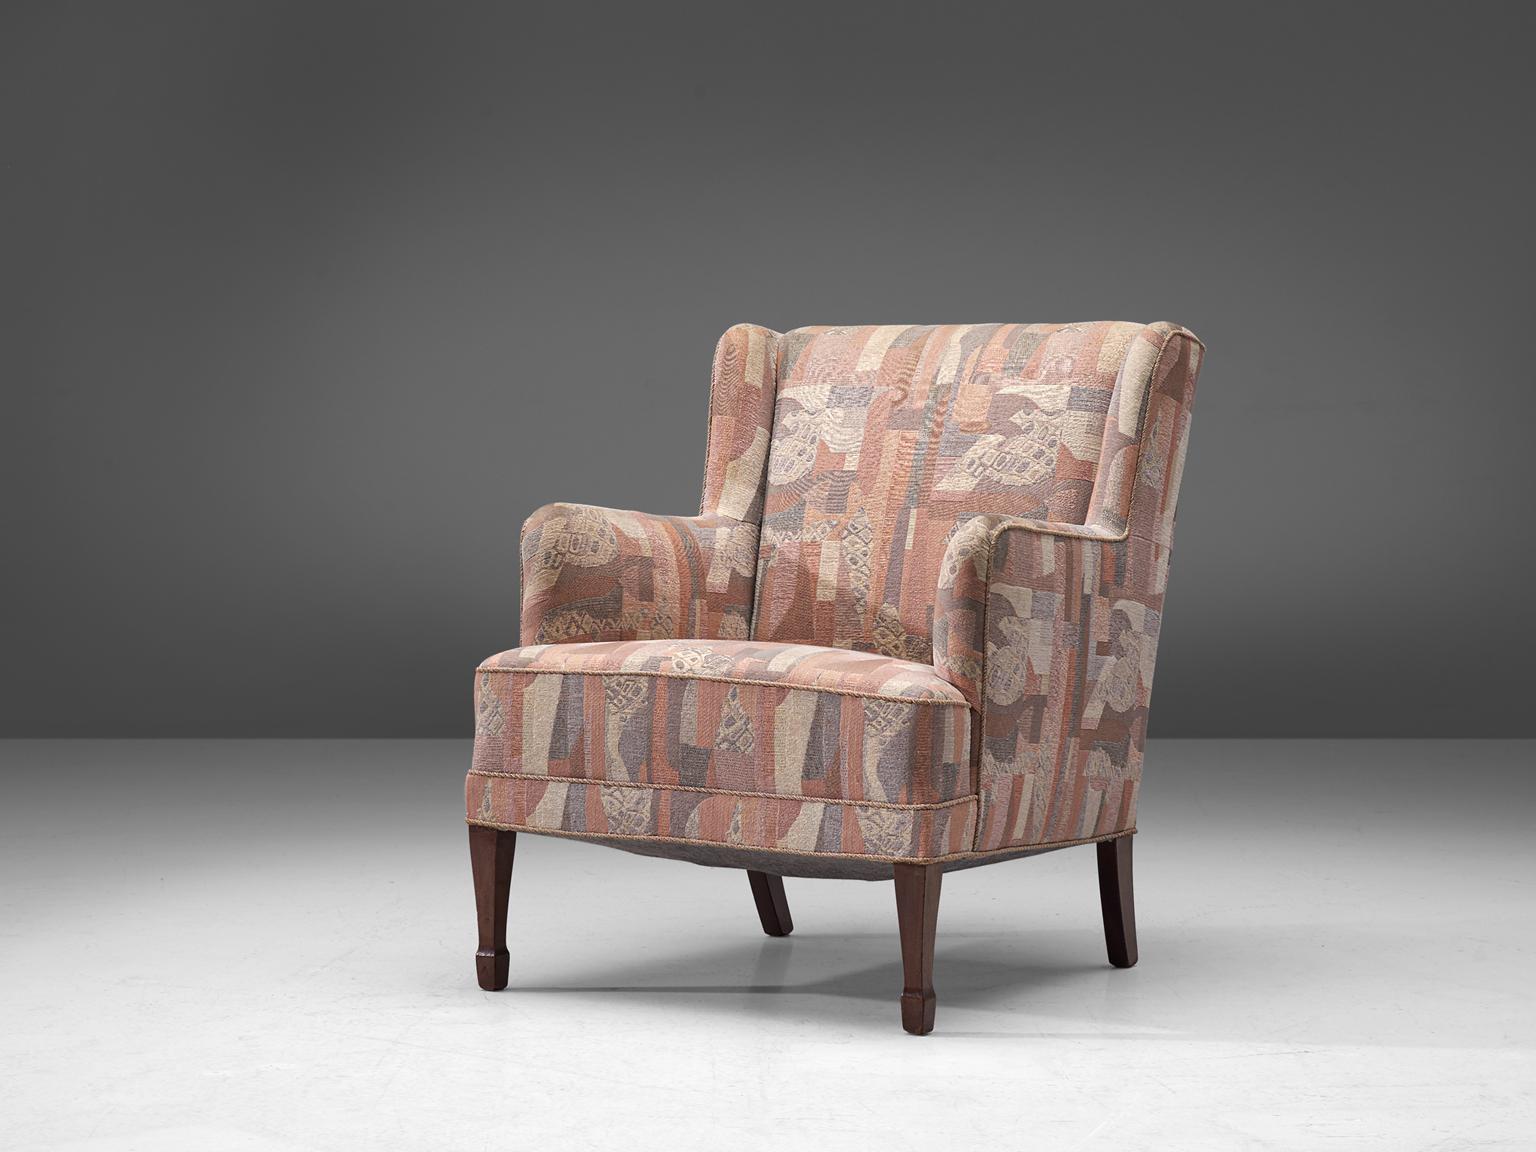 Frits Henningsen, wingback chair, multicolored pastel fabric, stained beech, Denmark 1930s

This modest yet refined armchair is a classic piece from designer Frits Henningsen. The four legs consist of stained beech. The backrests hold small wings,